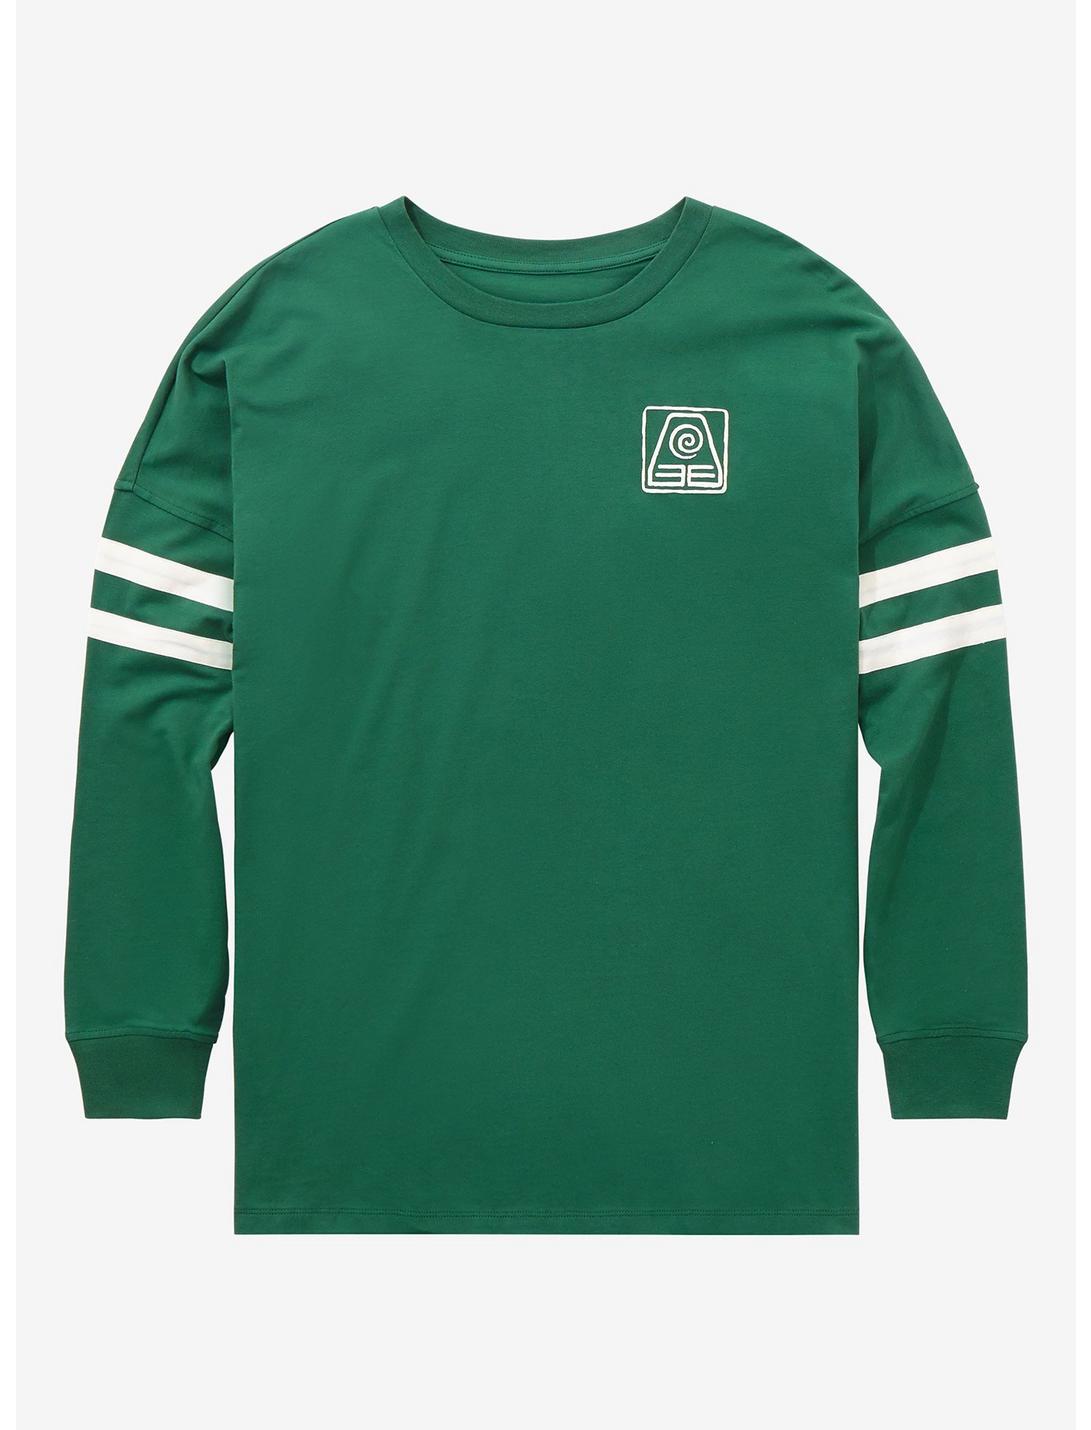 Avatar: The Last Airbender Earth Kingdom Hype Jersey, FOREST, hi-res